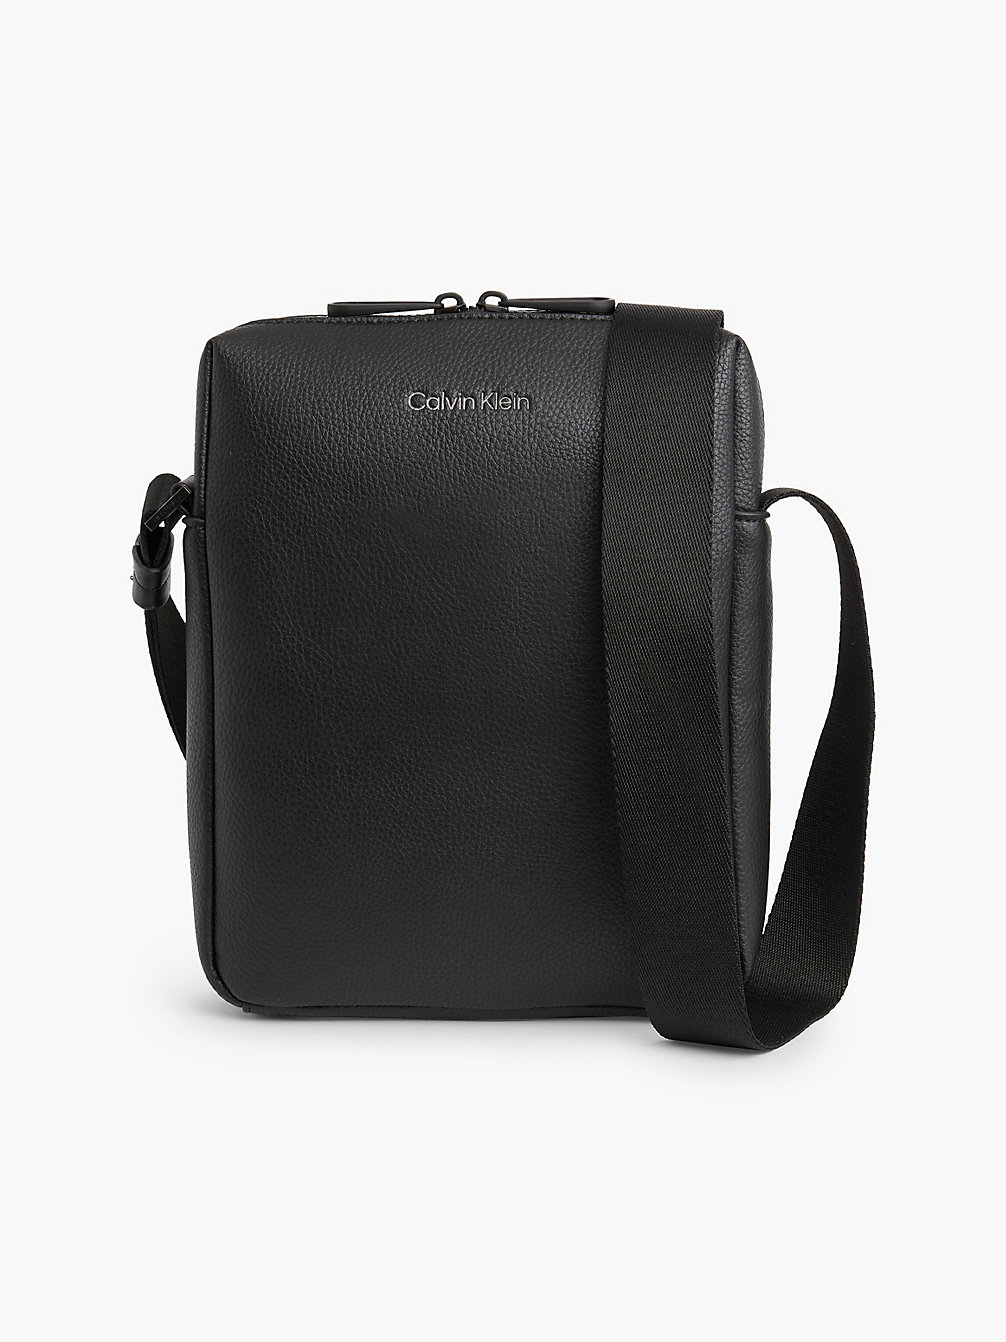 CK BLACK Recycled Faux Leather Crossbody Bag undefined men Calvin Klein